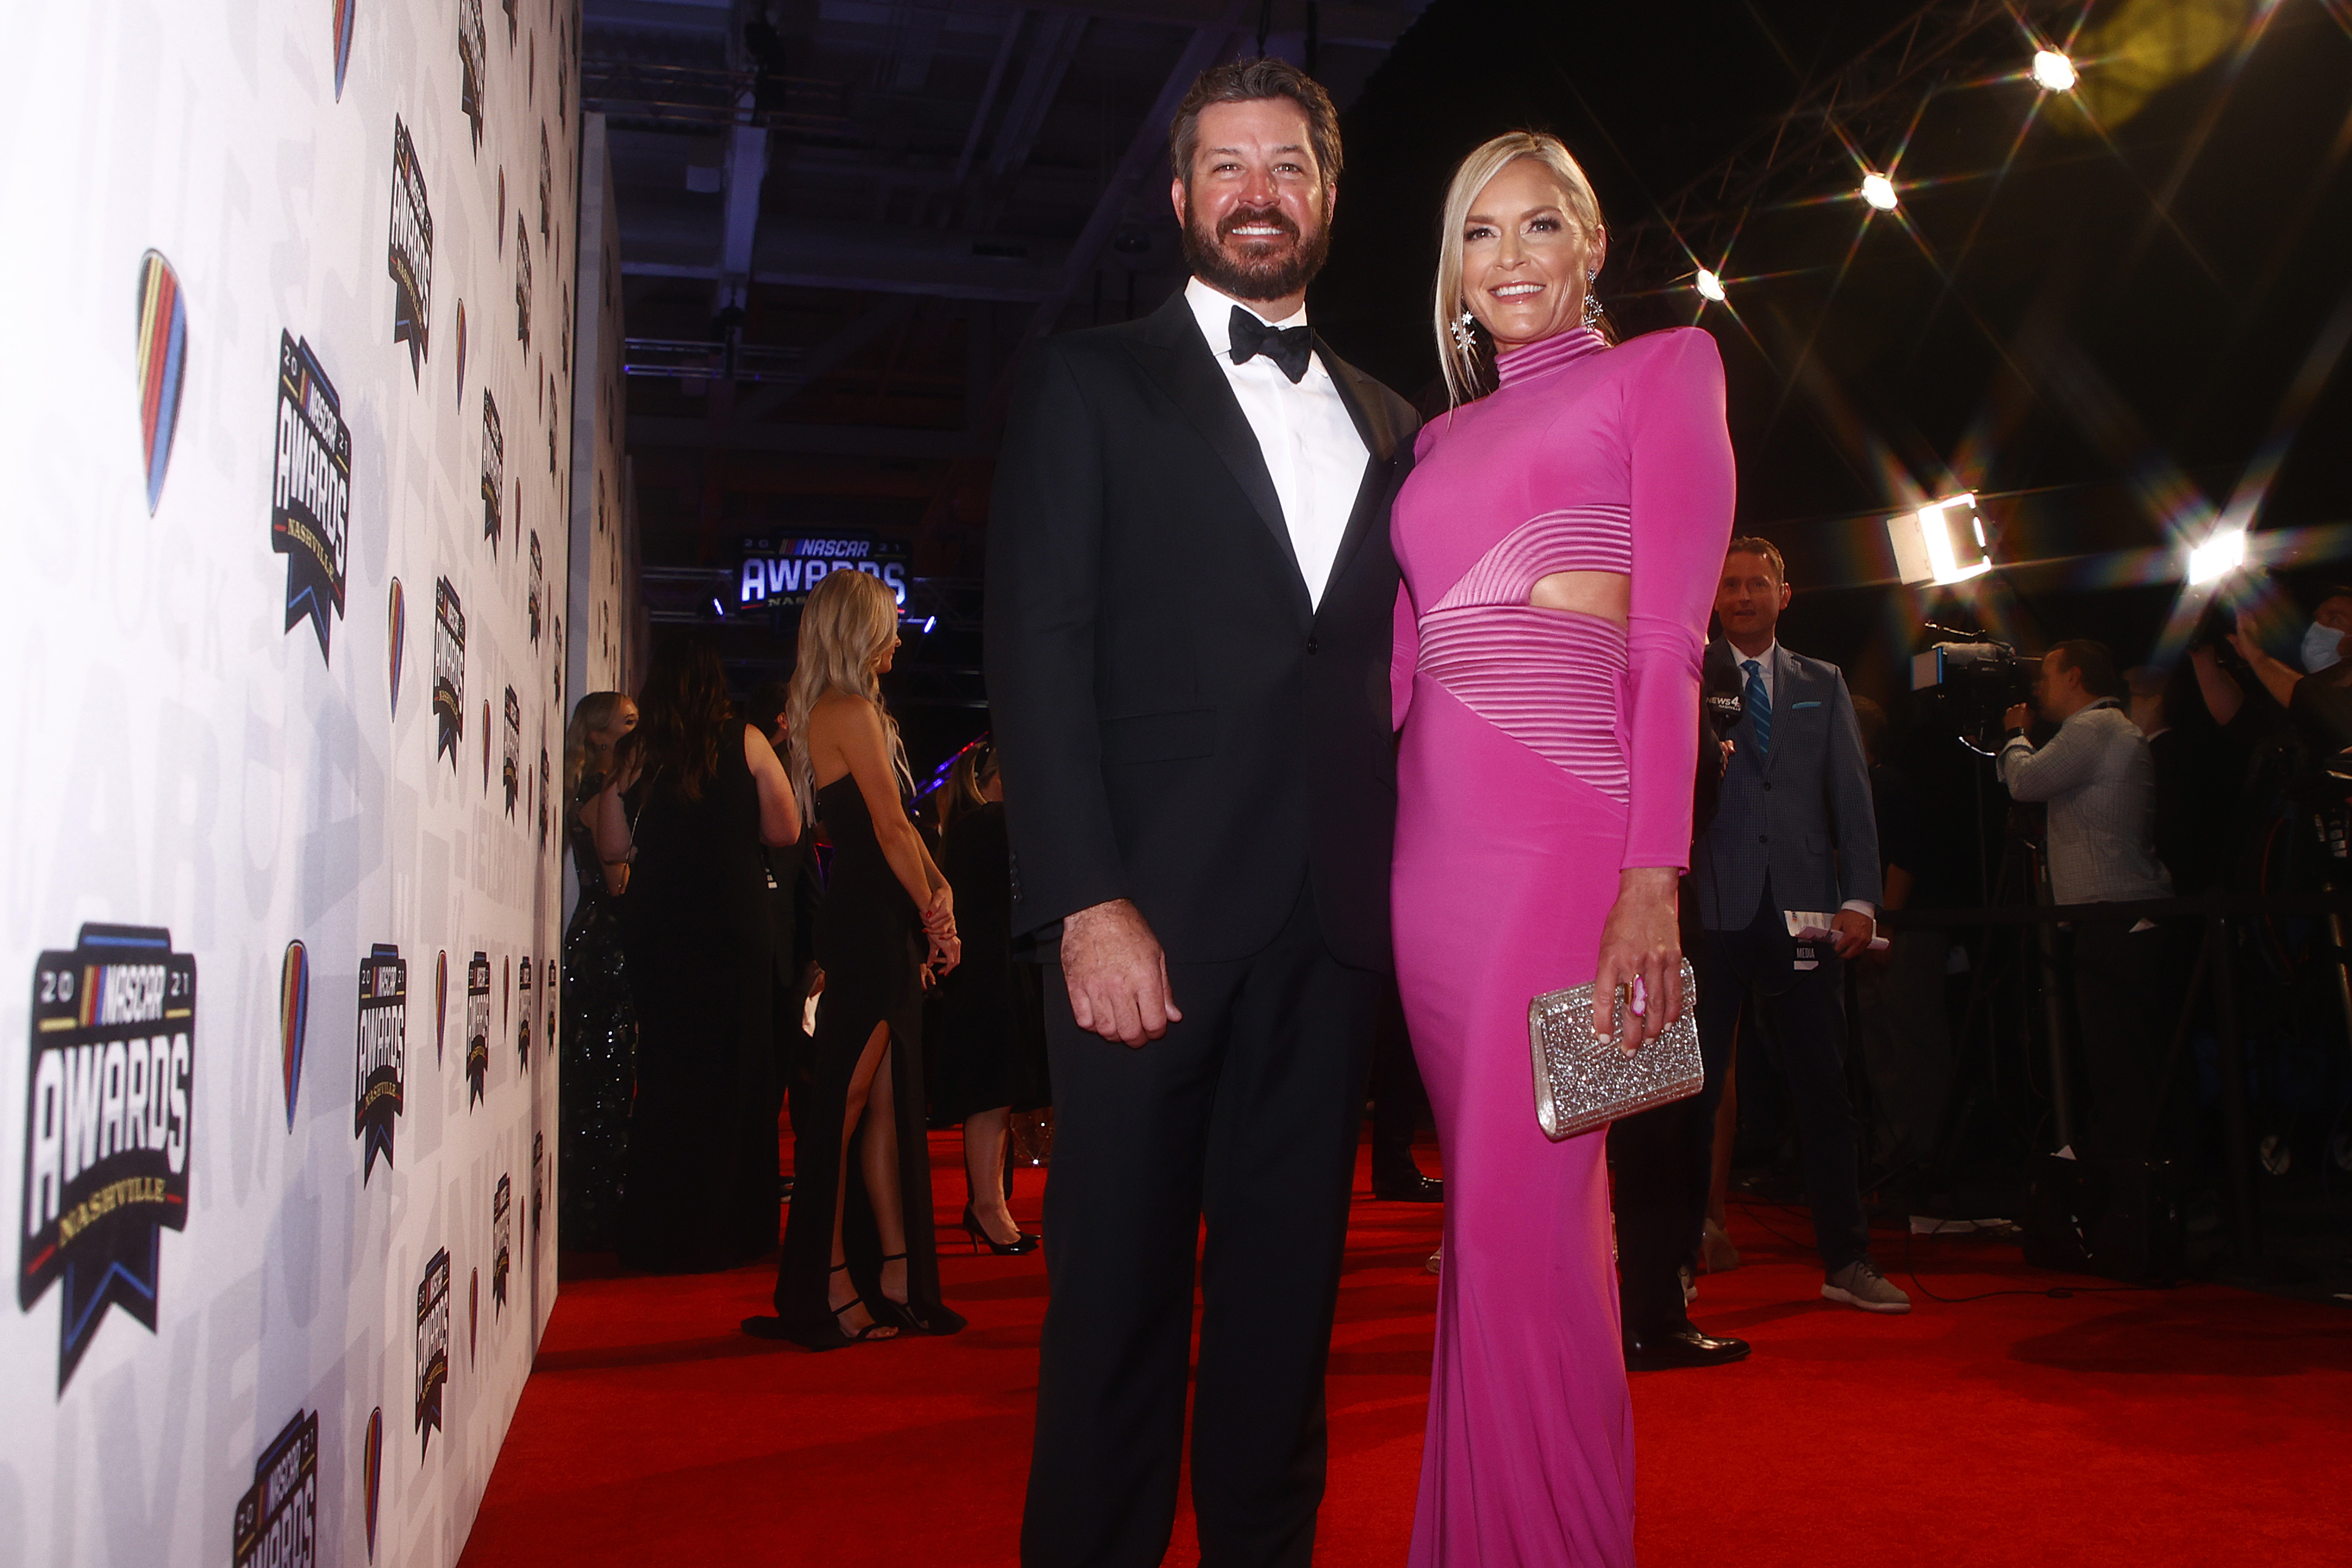 Martin Lee Truex Jr. and Sherry Pollex at the NASCAR Champion's Banquet on December 2, 2021, in Nashville | Source: Getty Images